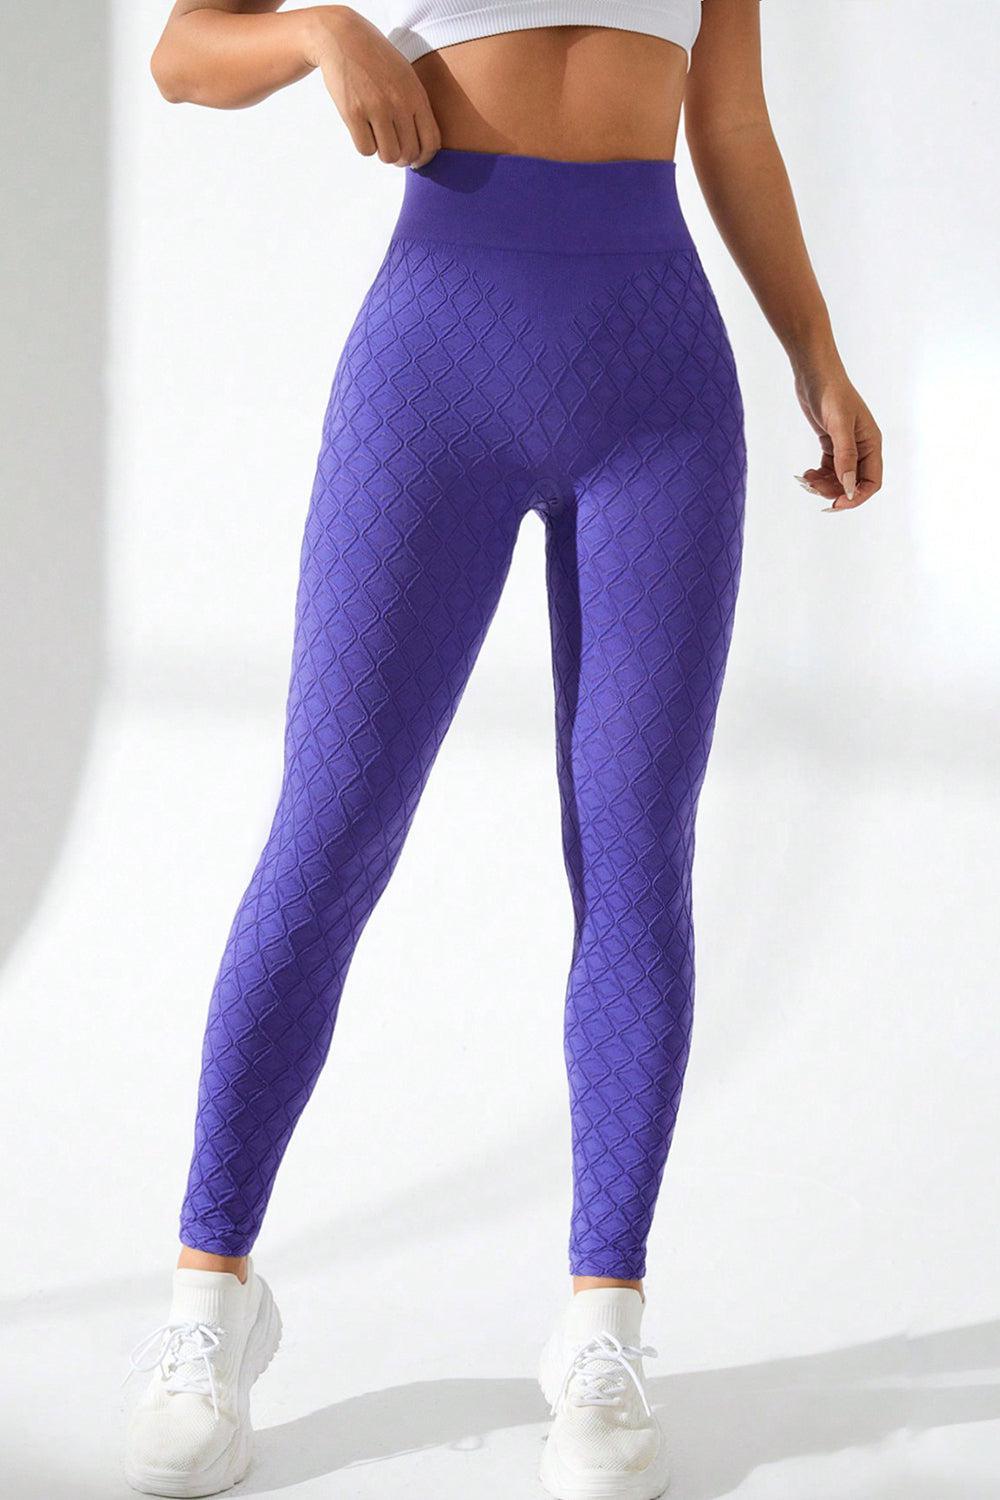 a woman in a white top and purple leggings